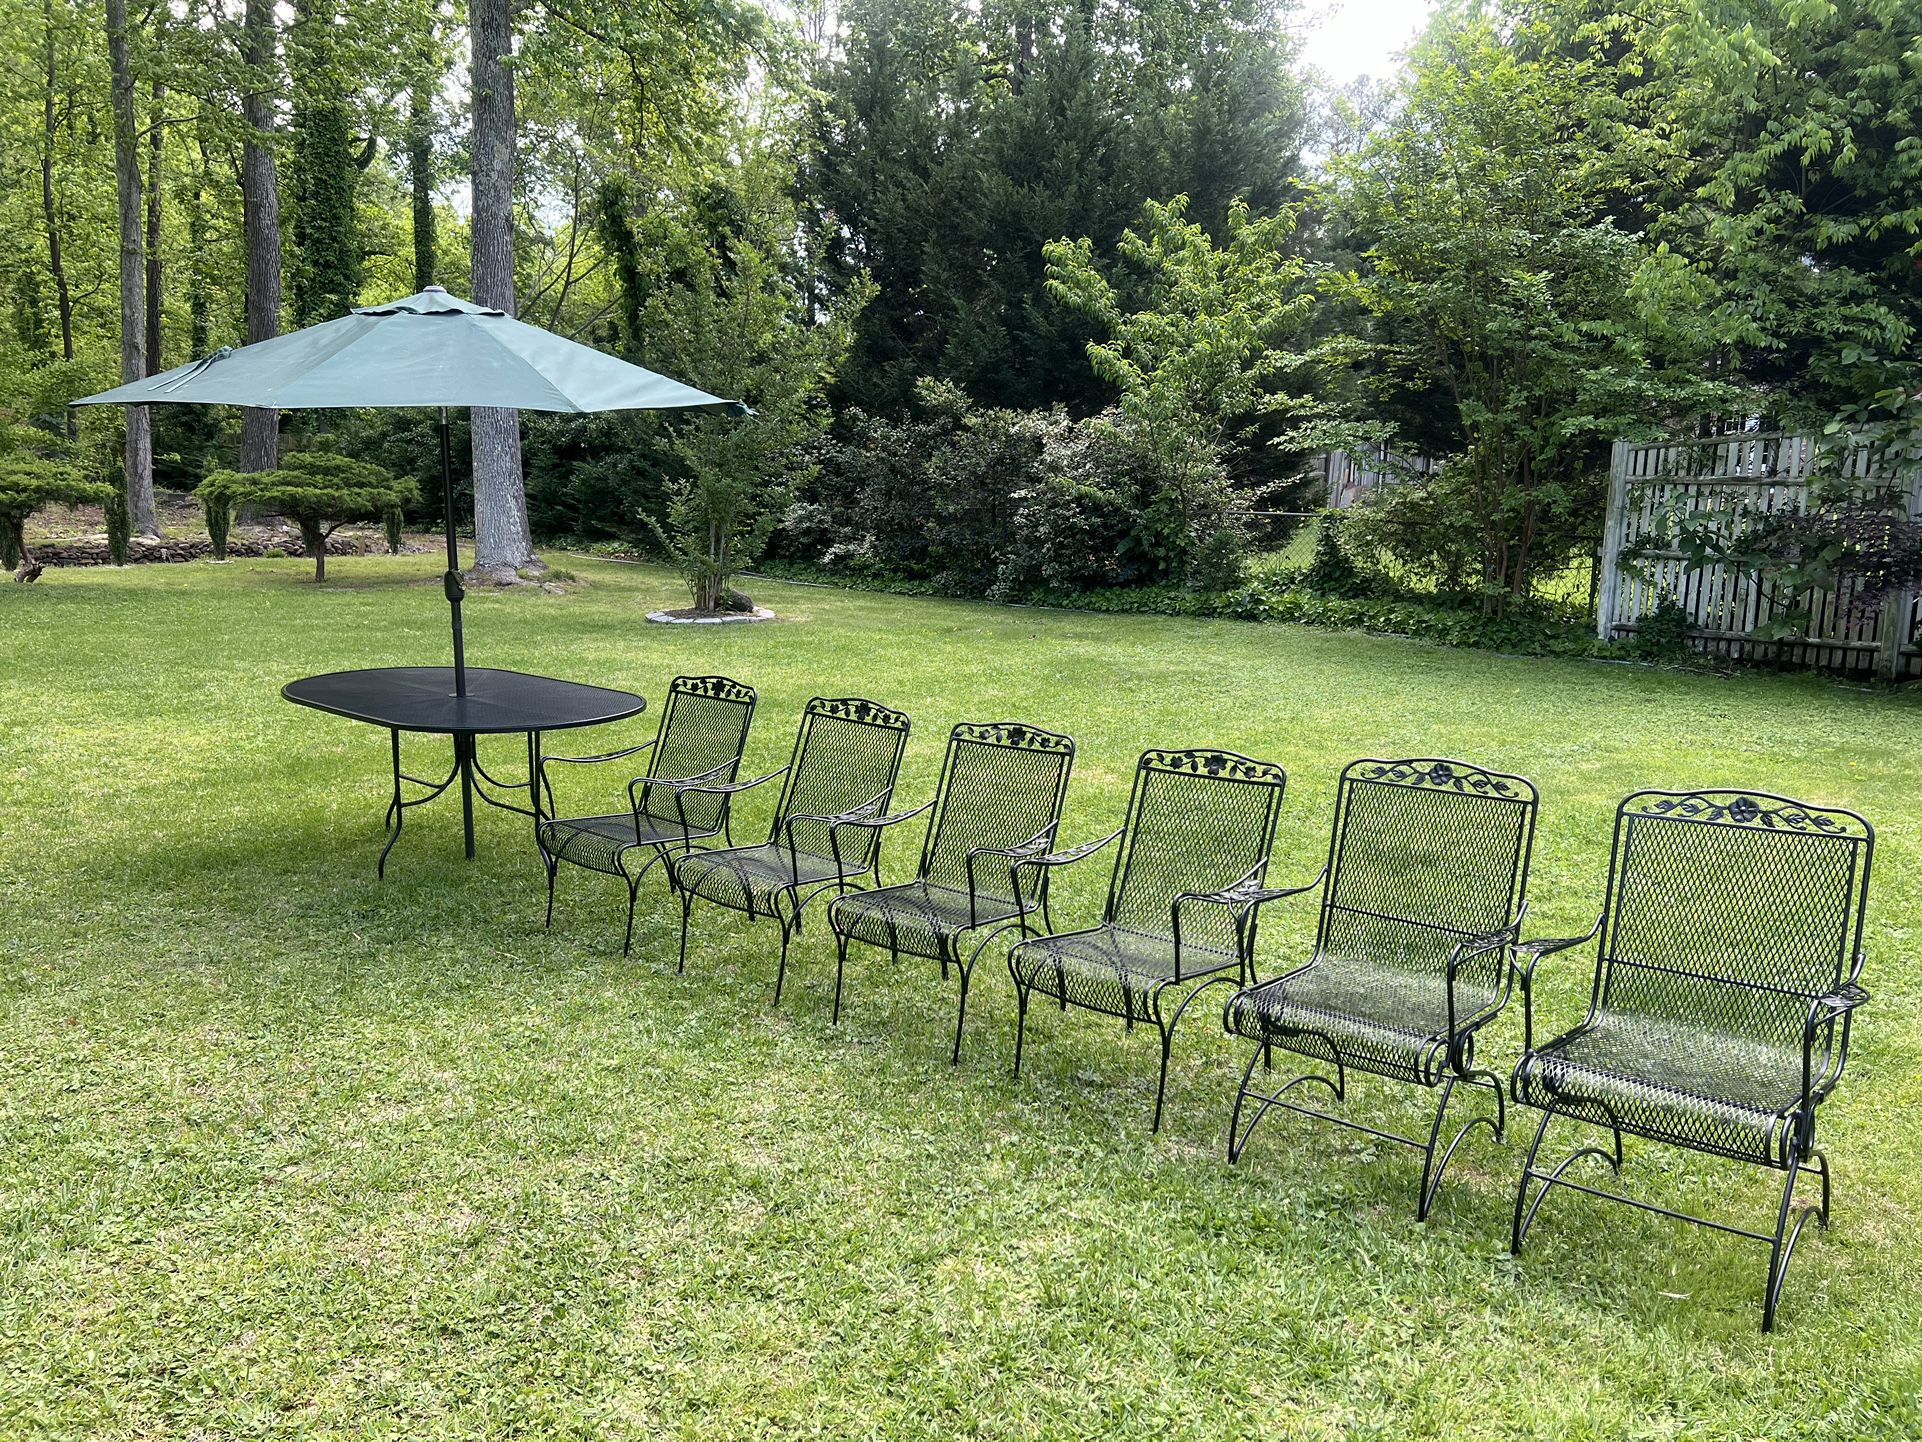 REFINISHED oval wrought iron set and 6 chairs+FREE umbrella $599 CAN DELIVER for a fee!